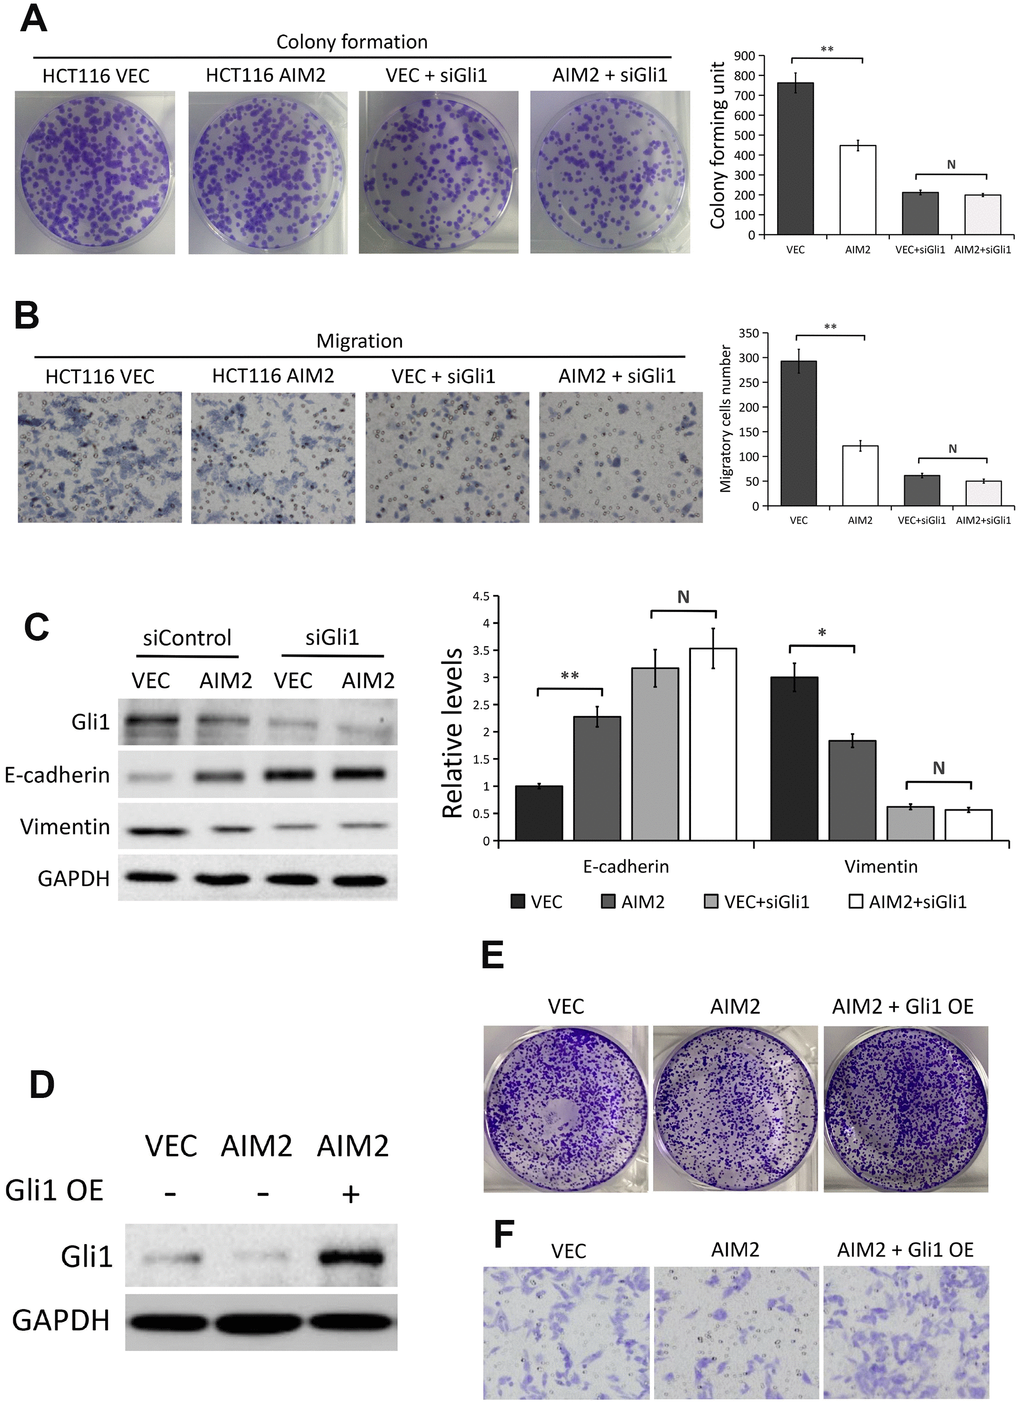 AIM2 inhibits HCT116 cell proliferation, migration and EMT progress in a Gli1-dependent manner. (A) Colony formation assays to test viability of HCT116 cells stably transfected with empty vector (VEC) or plasmid encoding human AIM2 (AIM2) with or without Gli1 siRNA treatment. Quantitative analysis results were presented as the mean±SEM (n=3). (B) Transwell assays to test migration ability of HCT116 cells stably transfected with empty vector (VEC) or plasmid encoding human AIM2 (AIM2) with or without Gli1 siRNA treatment. Quantitative analysis results were presented as the mean±SEM (n=3). (C) Western blots of E-cadherin and Vimentin protein expression in HCT116 cells stably transfected with empty vector (VEC) or plasmid encoding human AIM2 (AIM2) in the presence or absence of Gli1 siRNA. GAPDH as a loading control. Each experiment was performed at least triplicate and the bands were quantified and presented as the mean±SEM. (D) Western blots of Gli1 protein expression in LoVo (VEC vs. AIM2) cells transfected with plasmids encoding human Gli1 or empty vector. (E, F) Colony formation assay (E) and transwell assay in LoVo (VEC vs. AIM2) cells transfected with plasmids encoding human Gli1 or empty vector. N, nonsignificant, *P